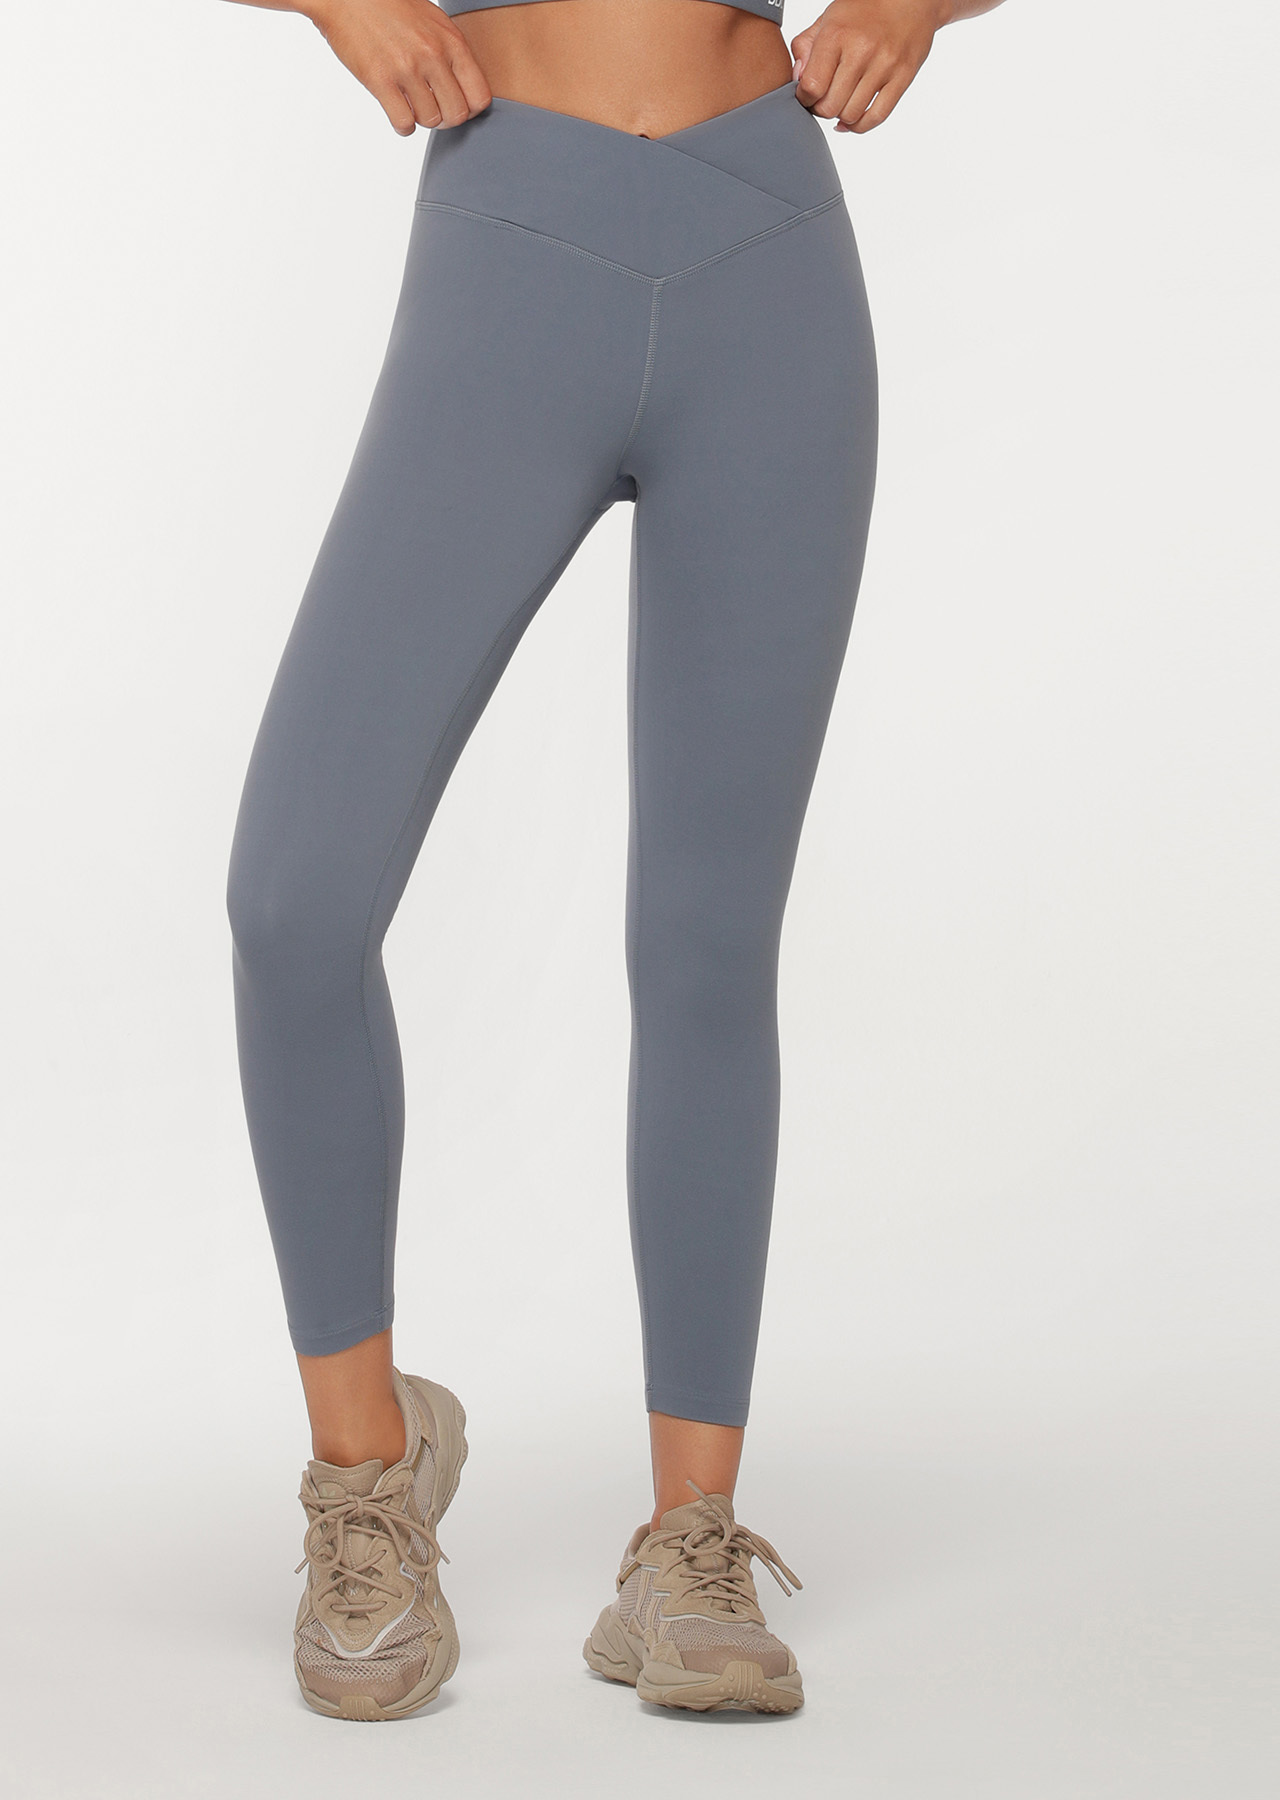 STRUT-THIS The Kennedy Ankle Legging in Heather Grey | REVOLVE